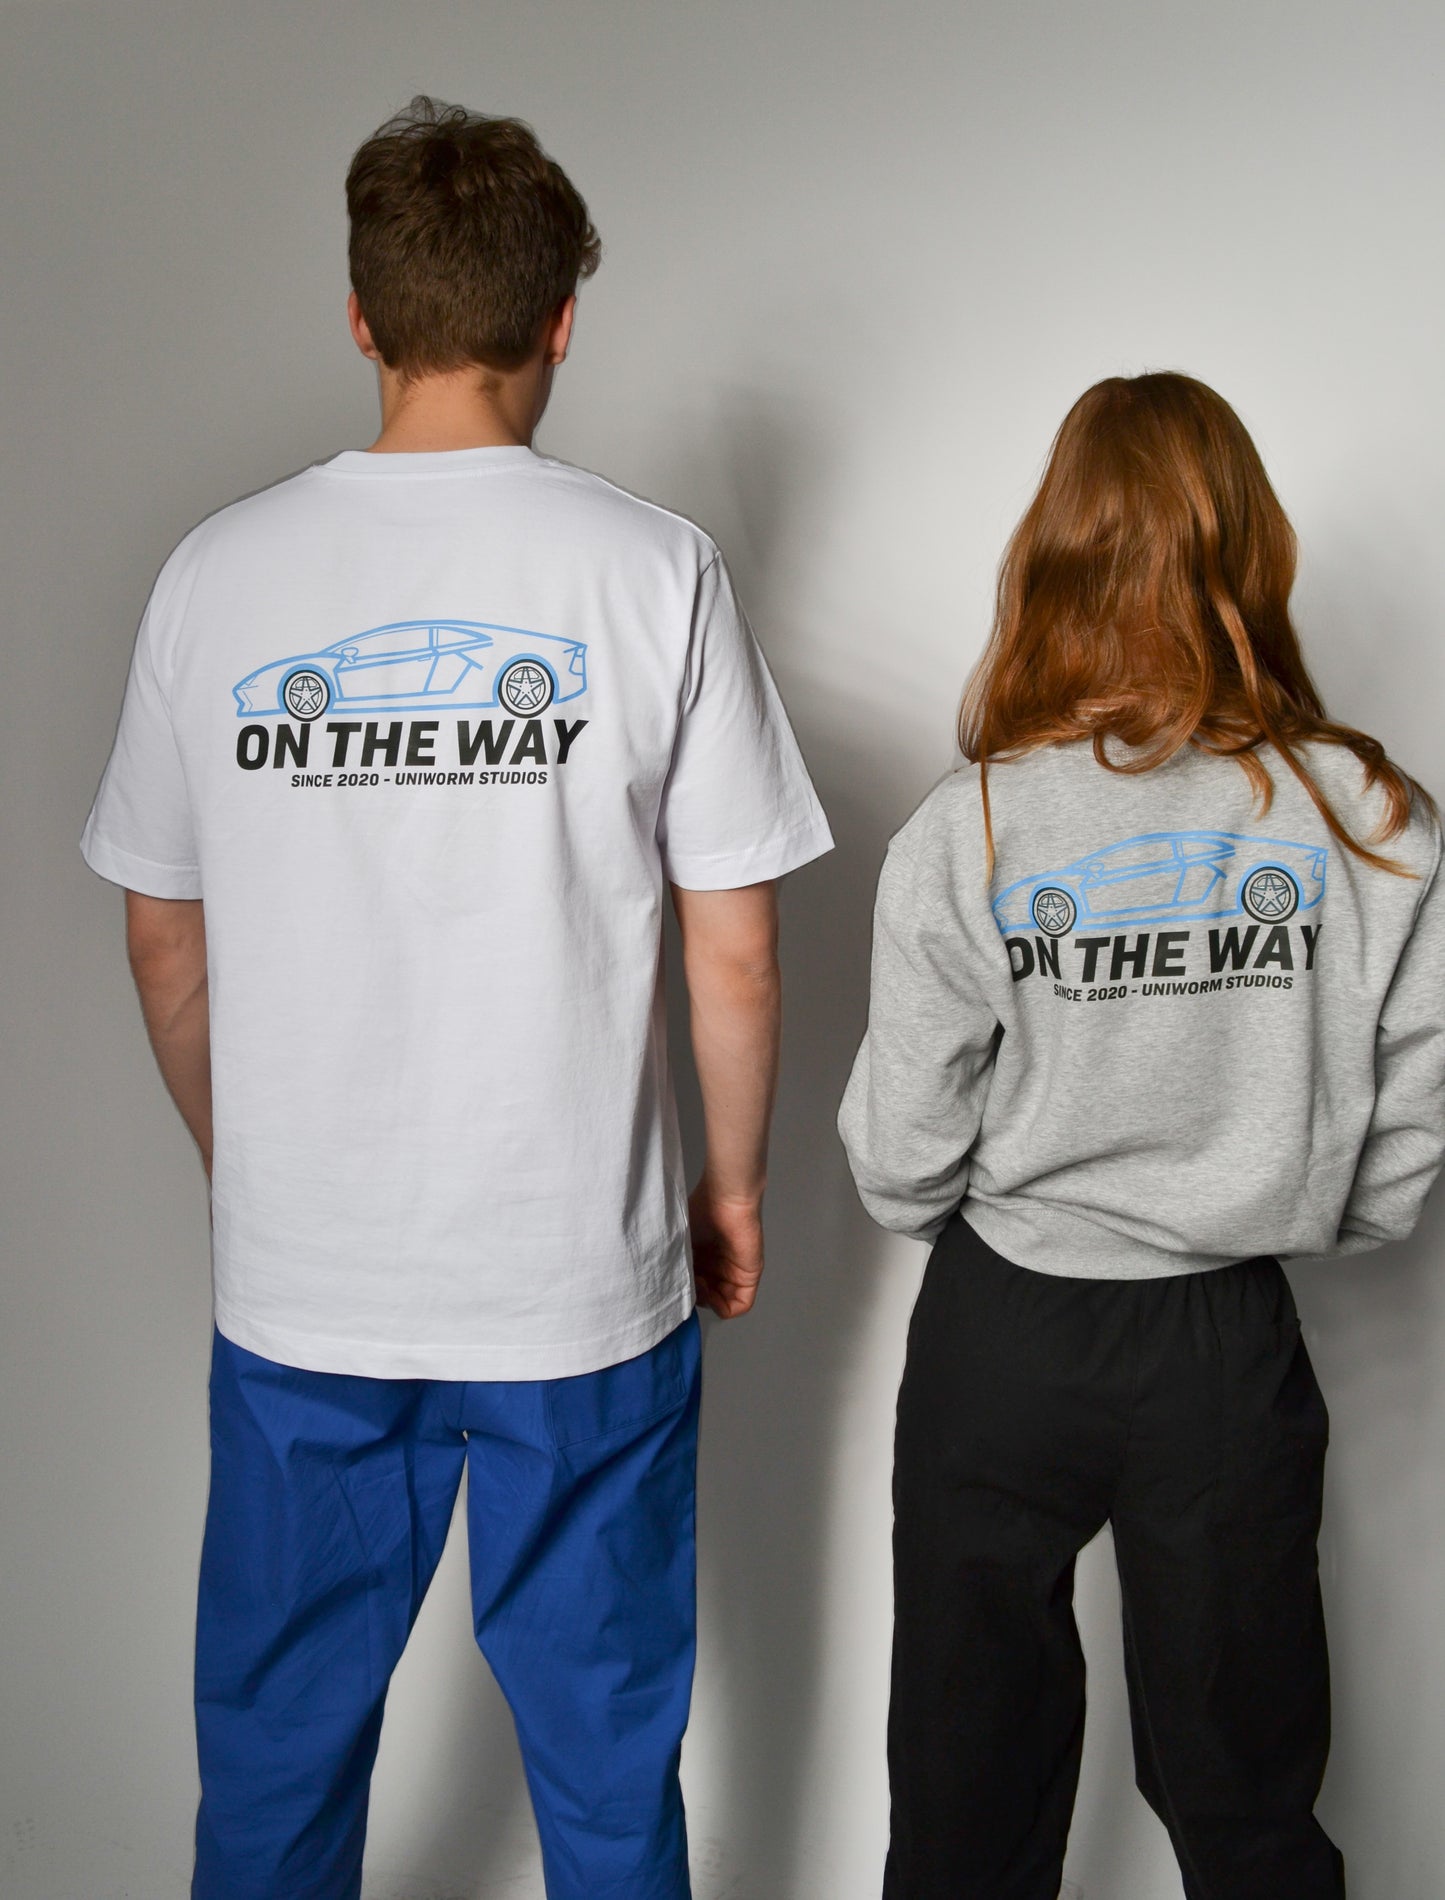 ON THE WAY T-SHIRT